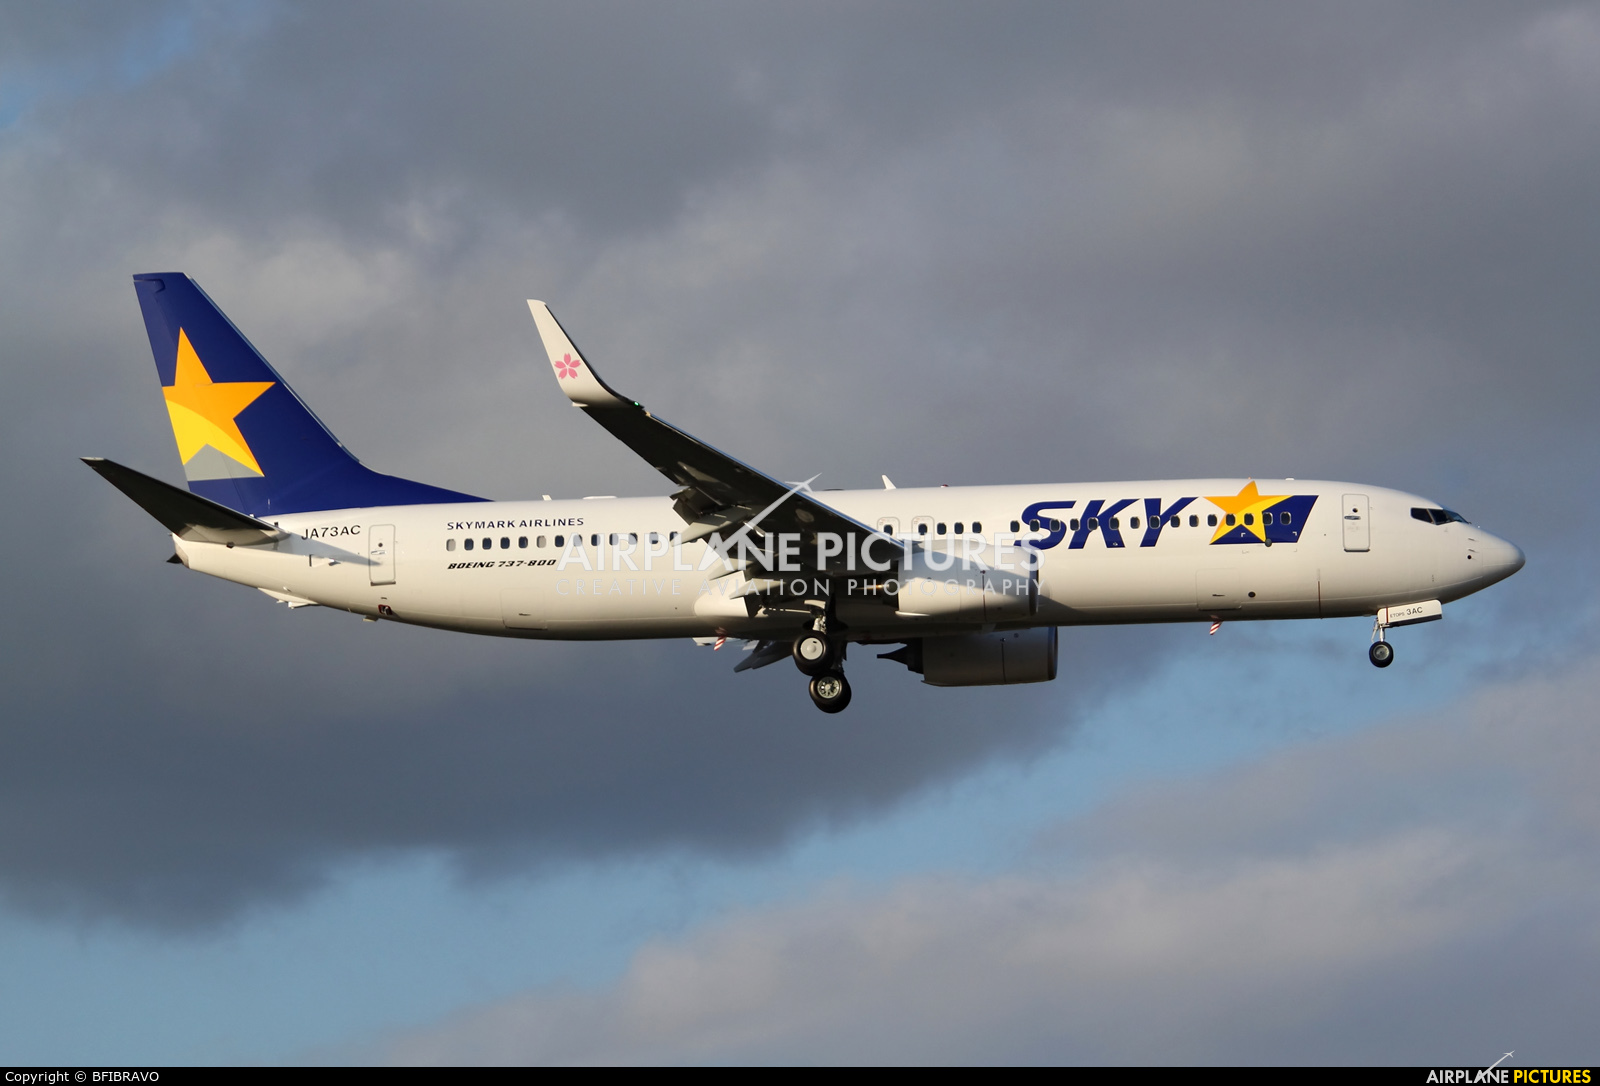 Skymark Airlines JA73AC aircraft at Seattle - Boeing Field / King County Intl